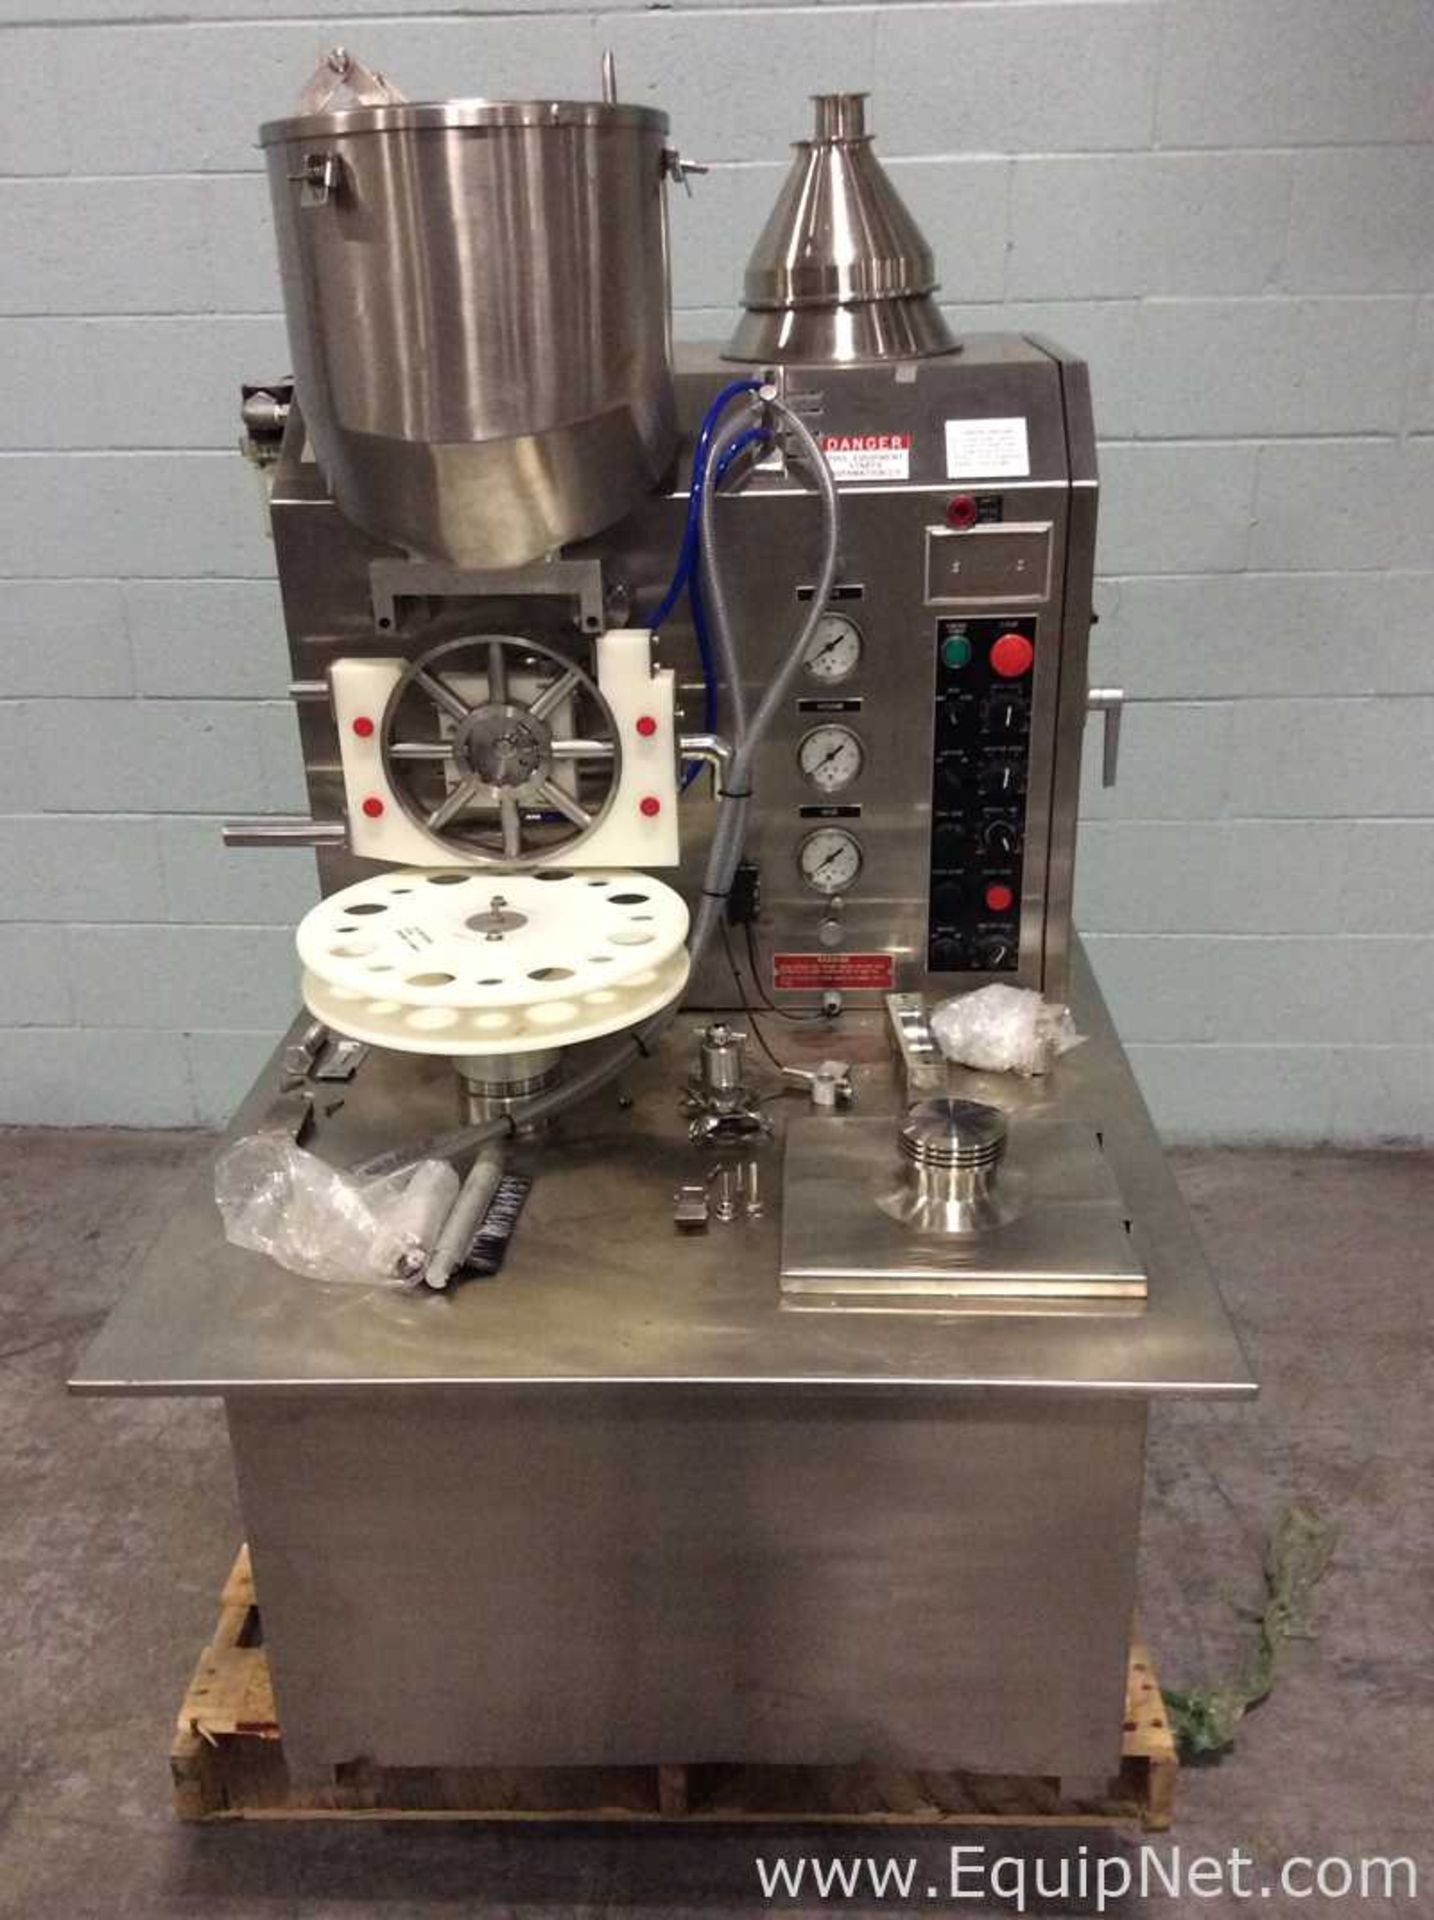 Perry Industries E-1300 Table Top Powder Filler